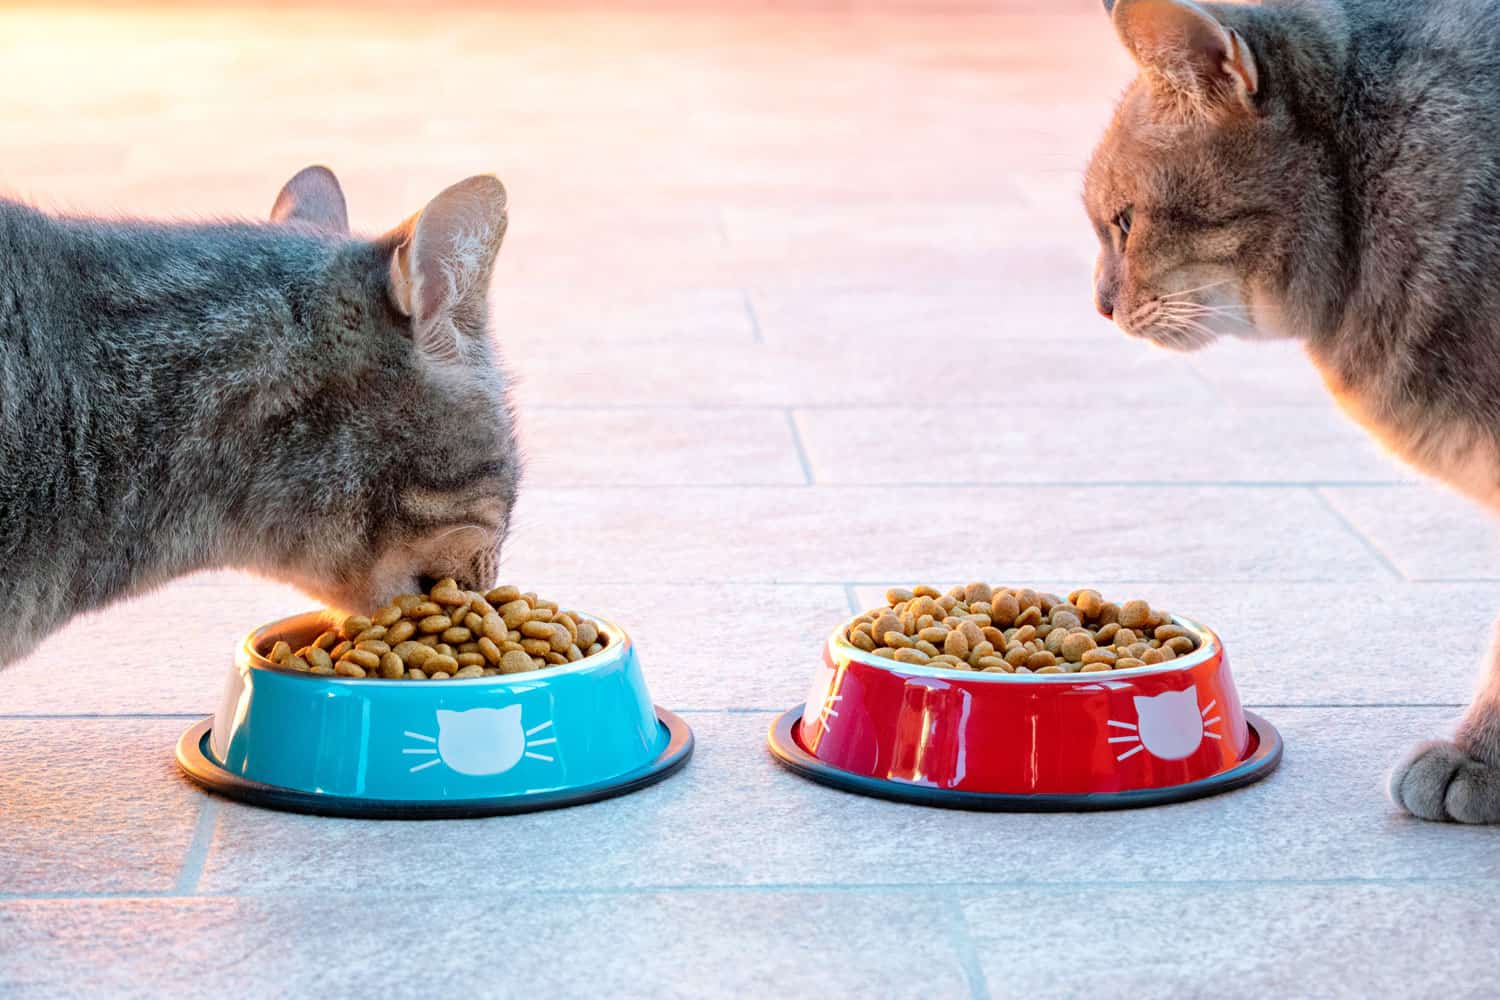 Excess intake of food in cats. Overeating in cats. Close up on cats eating in a bowl full of dry food. Obesity issue in cats. 